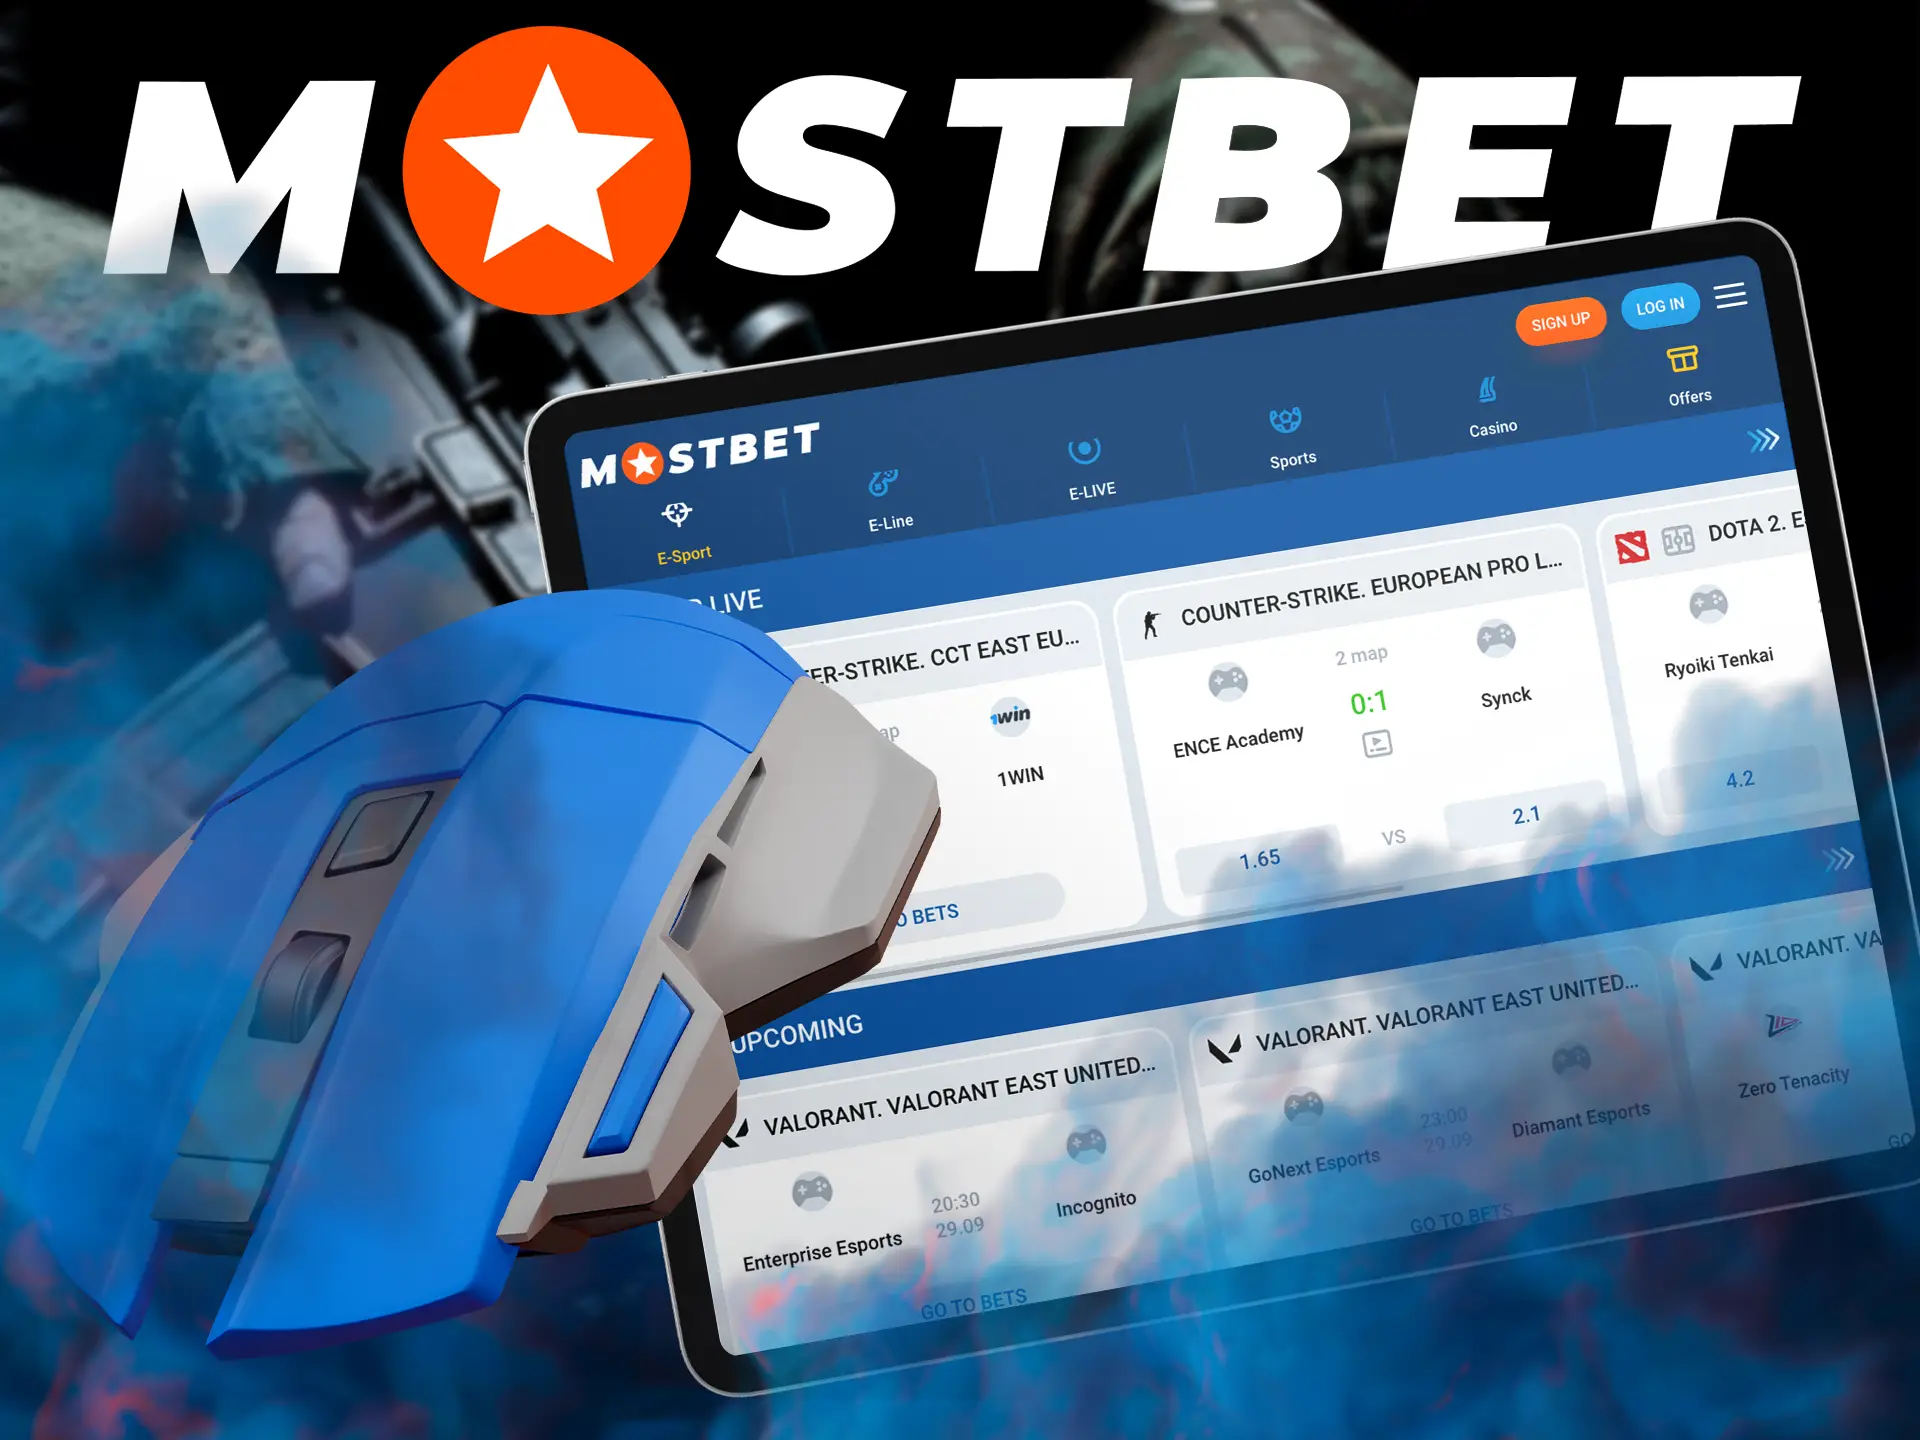 Online gaming is gaining popularity around the world, with players from India becoming more active in betting on them at Mostbet in recent years.